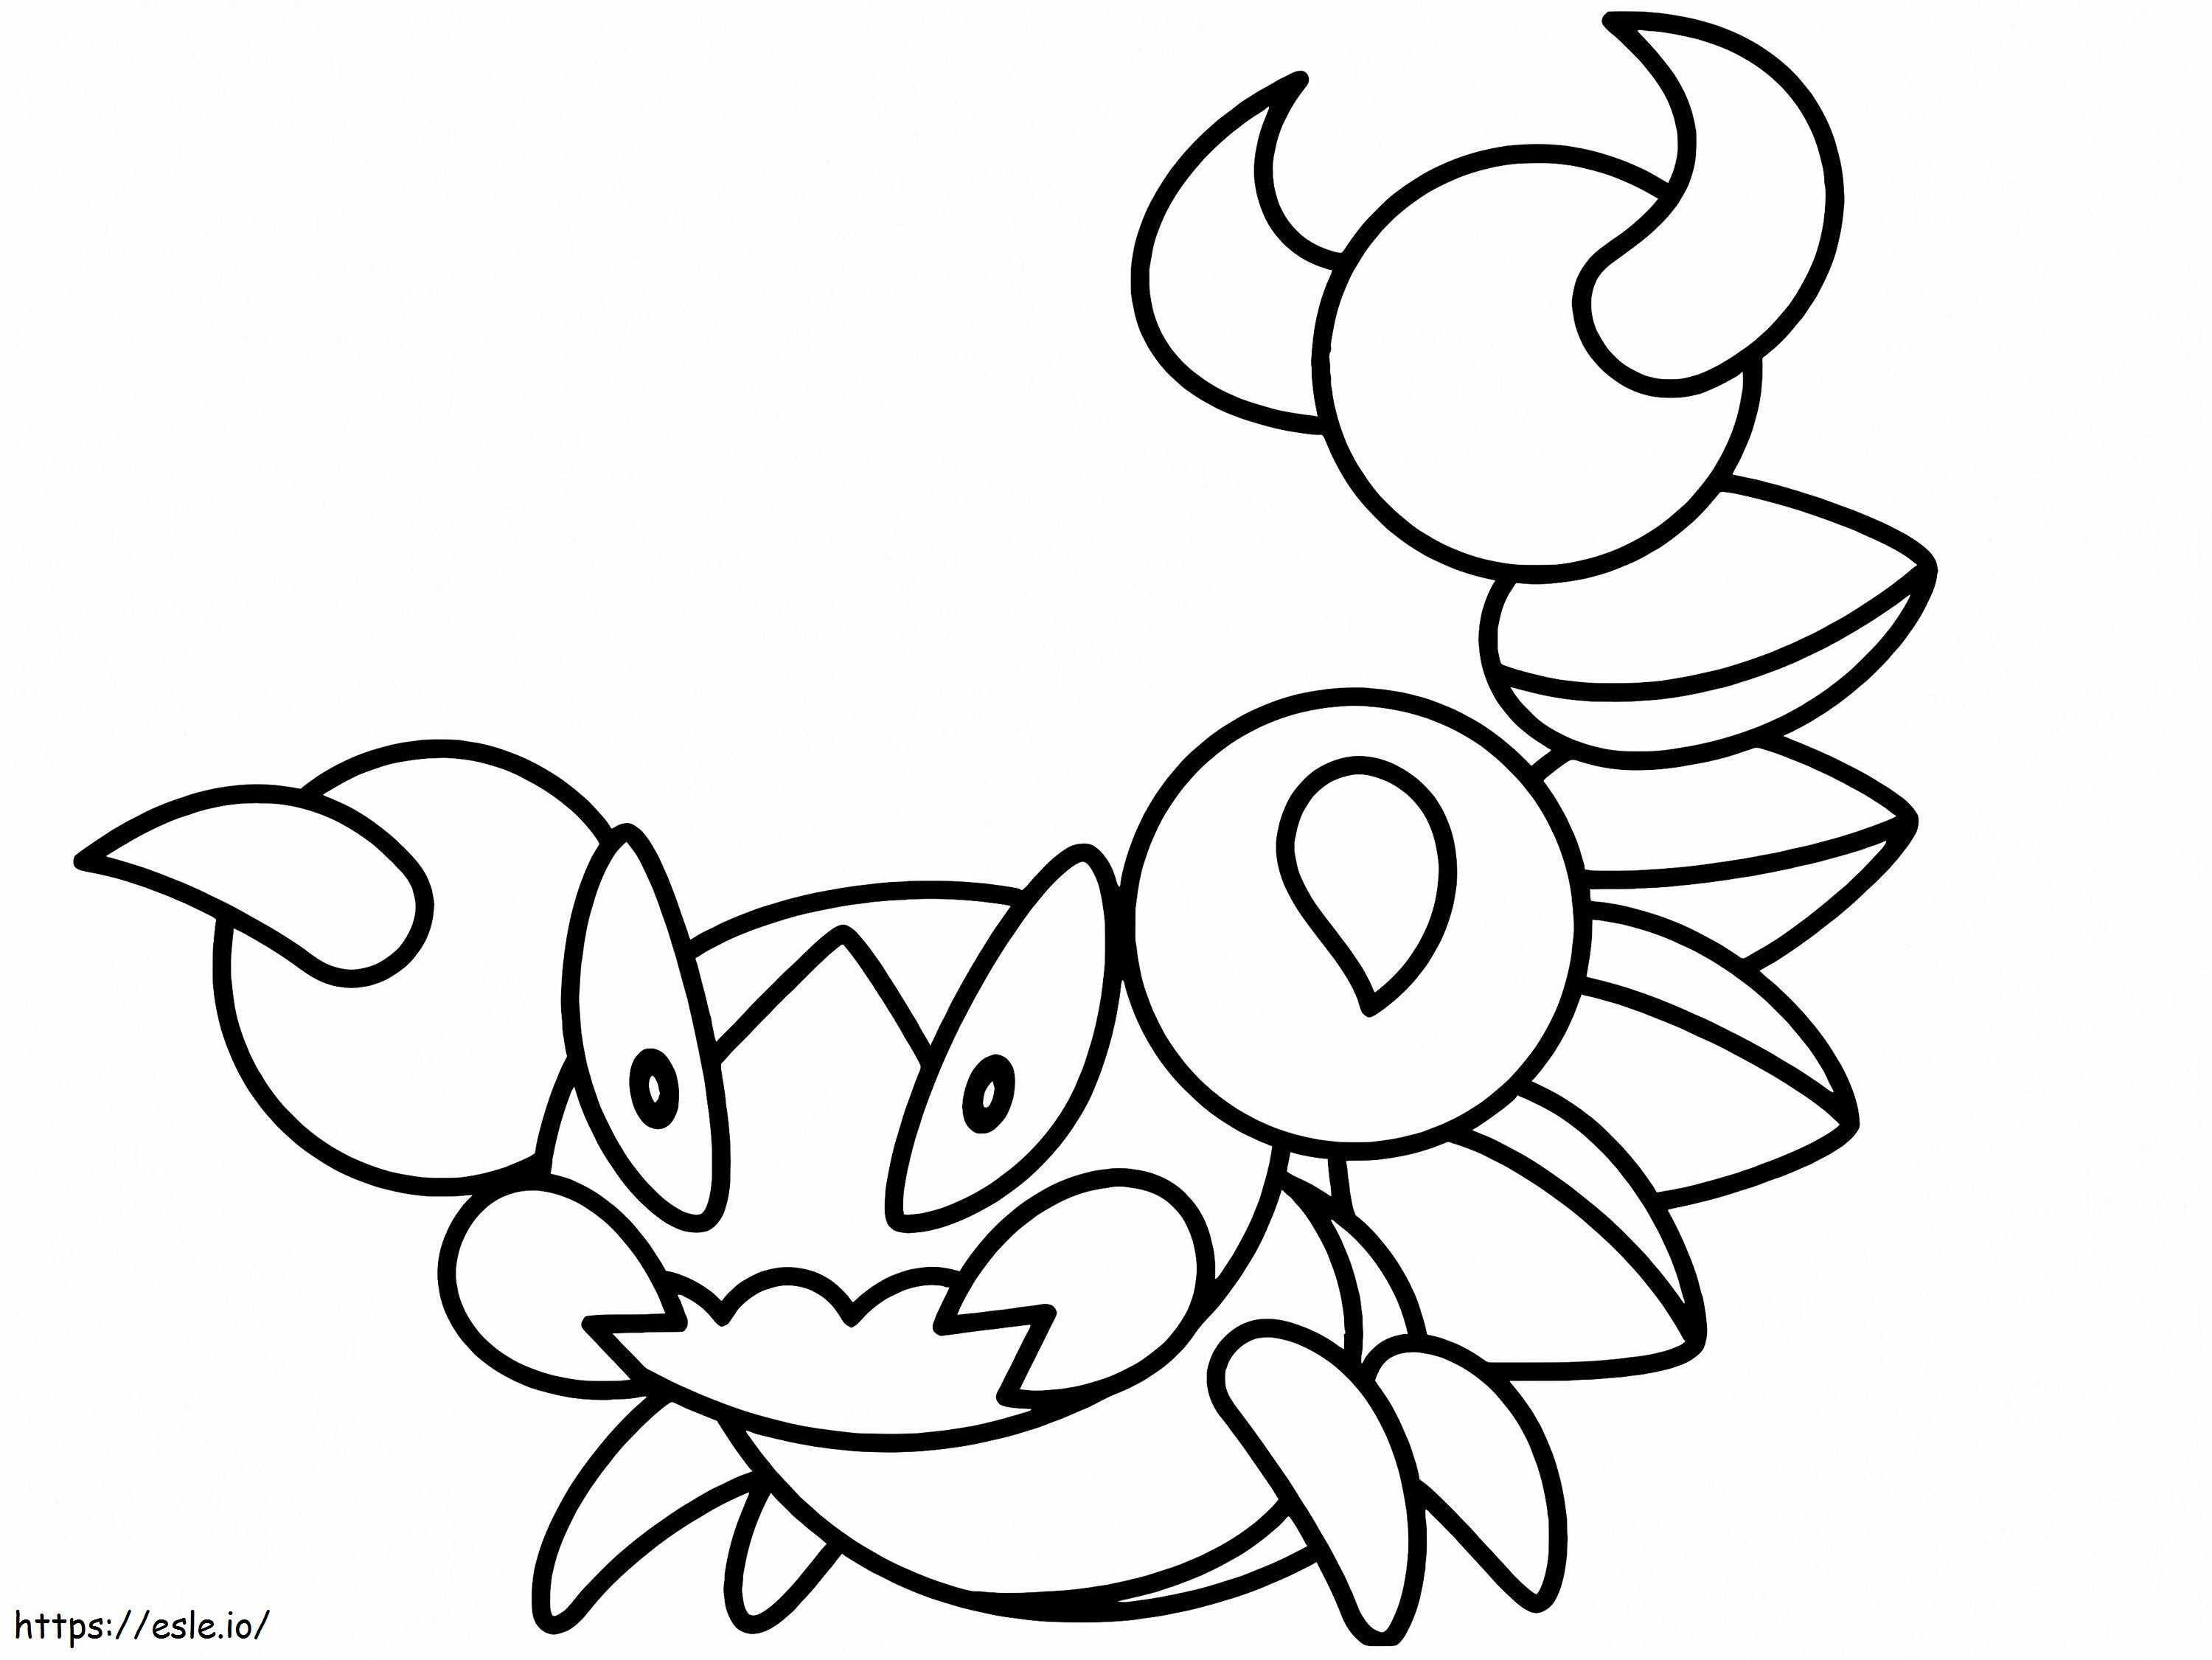 Shell Pokemon coloring page